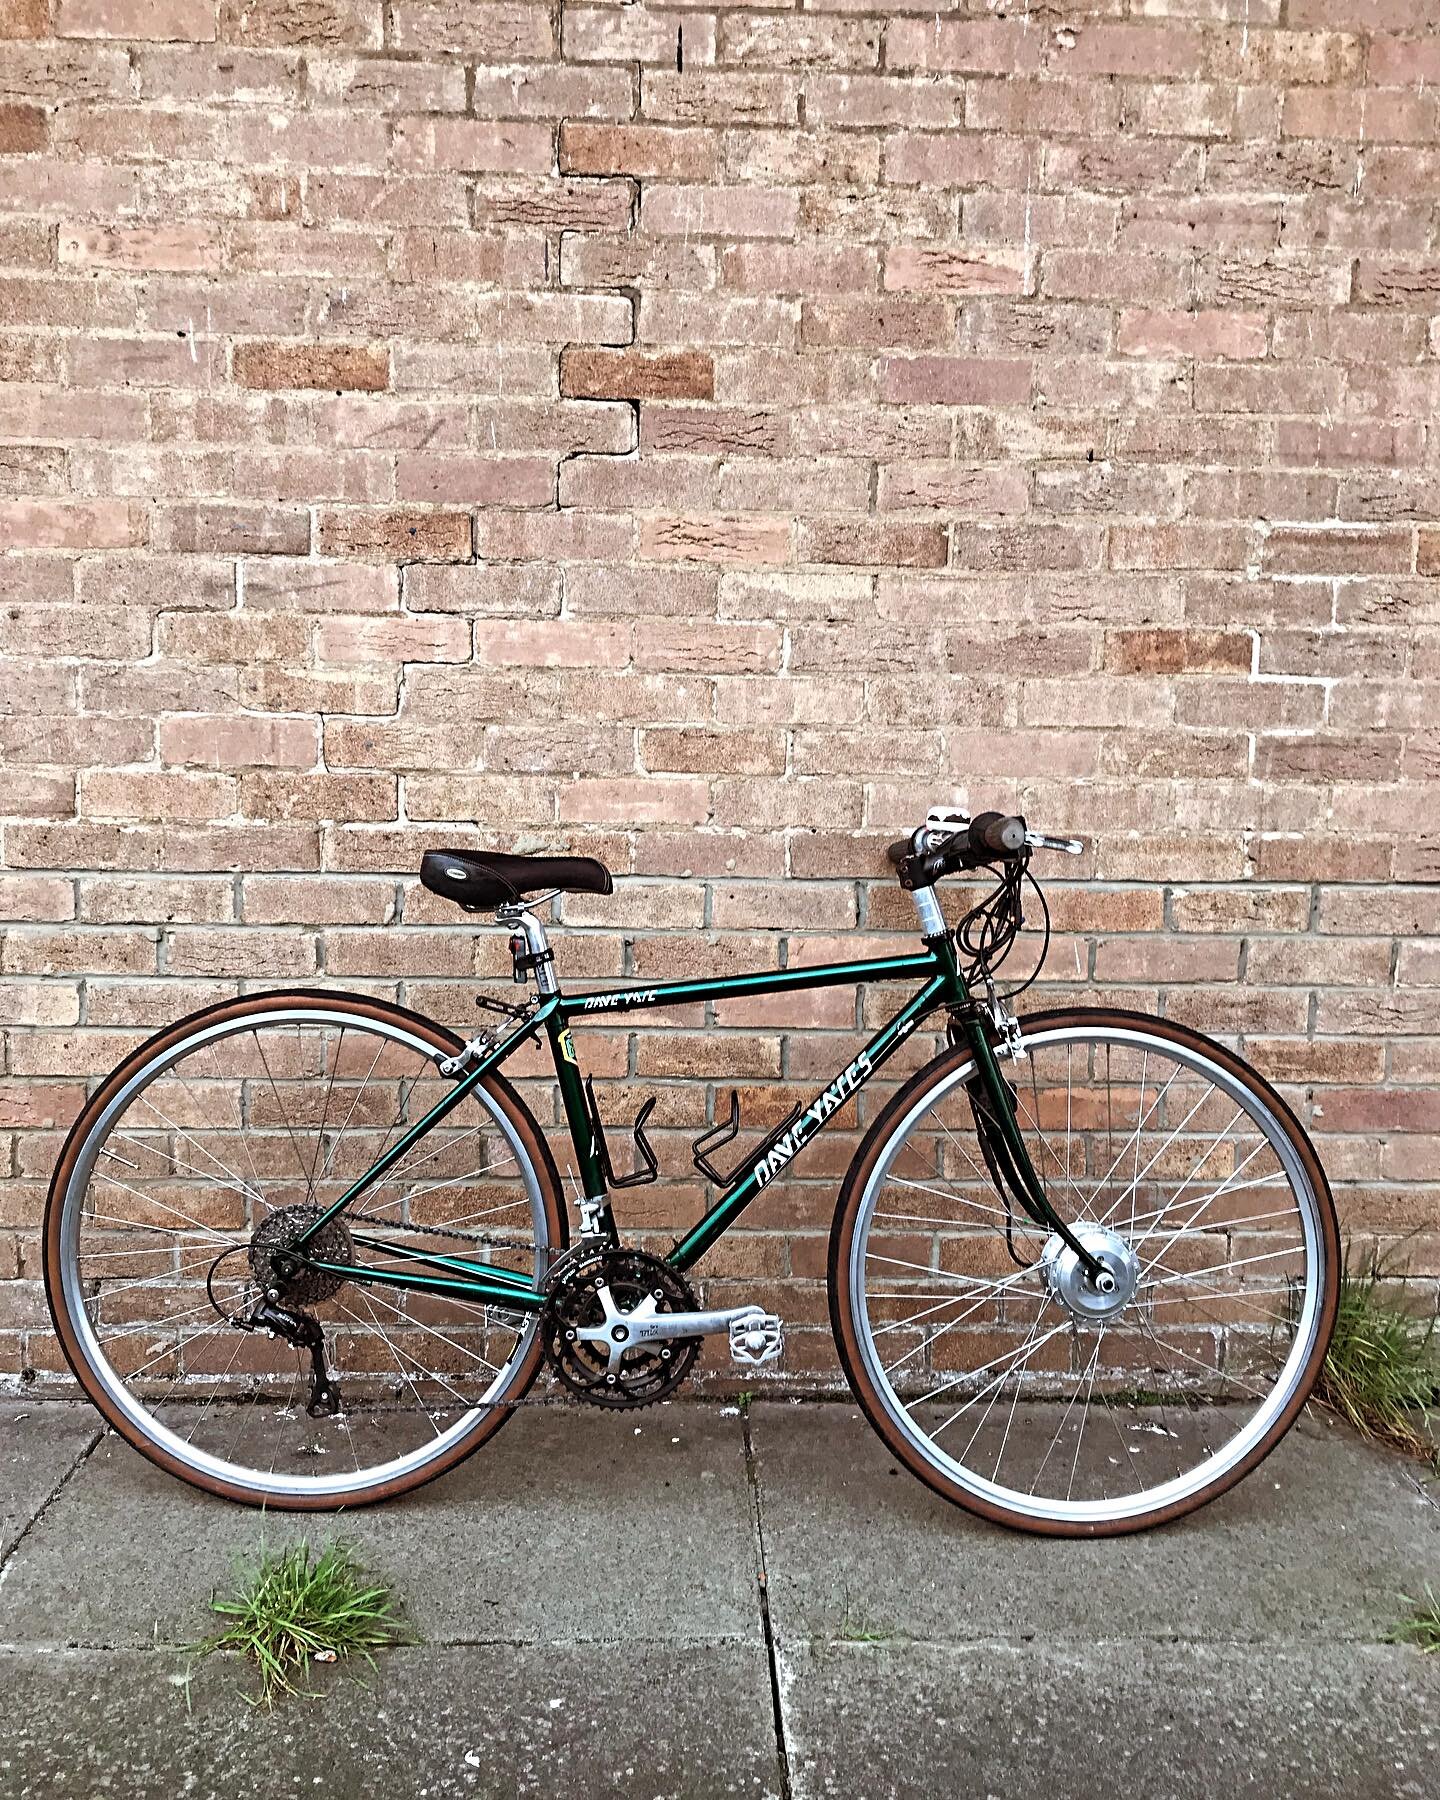 A much loved Dave Yates that&rsquo;s had an e bike conversion to give it another life or a greatly extended life. A beautiful frame with an amazing fillet brazed headtube downtube/toptube junction. What a joy. Its great to work on stuff like this and